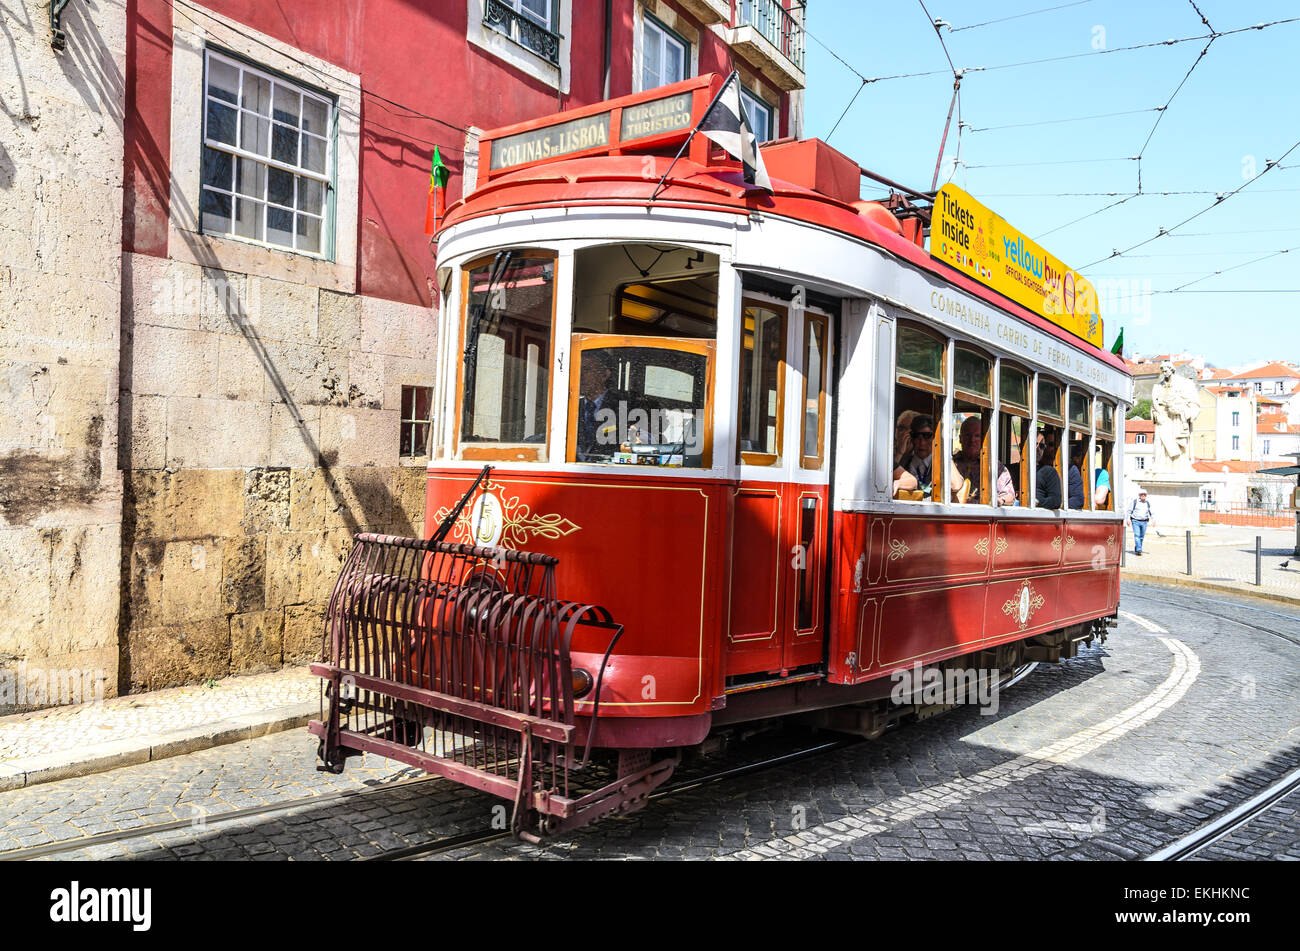 Traditional trams on medieval street of Alfama, ancient district of Lisbon, Portugal. Stock Photo